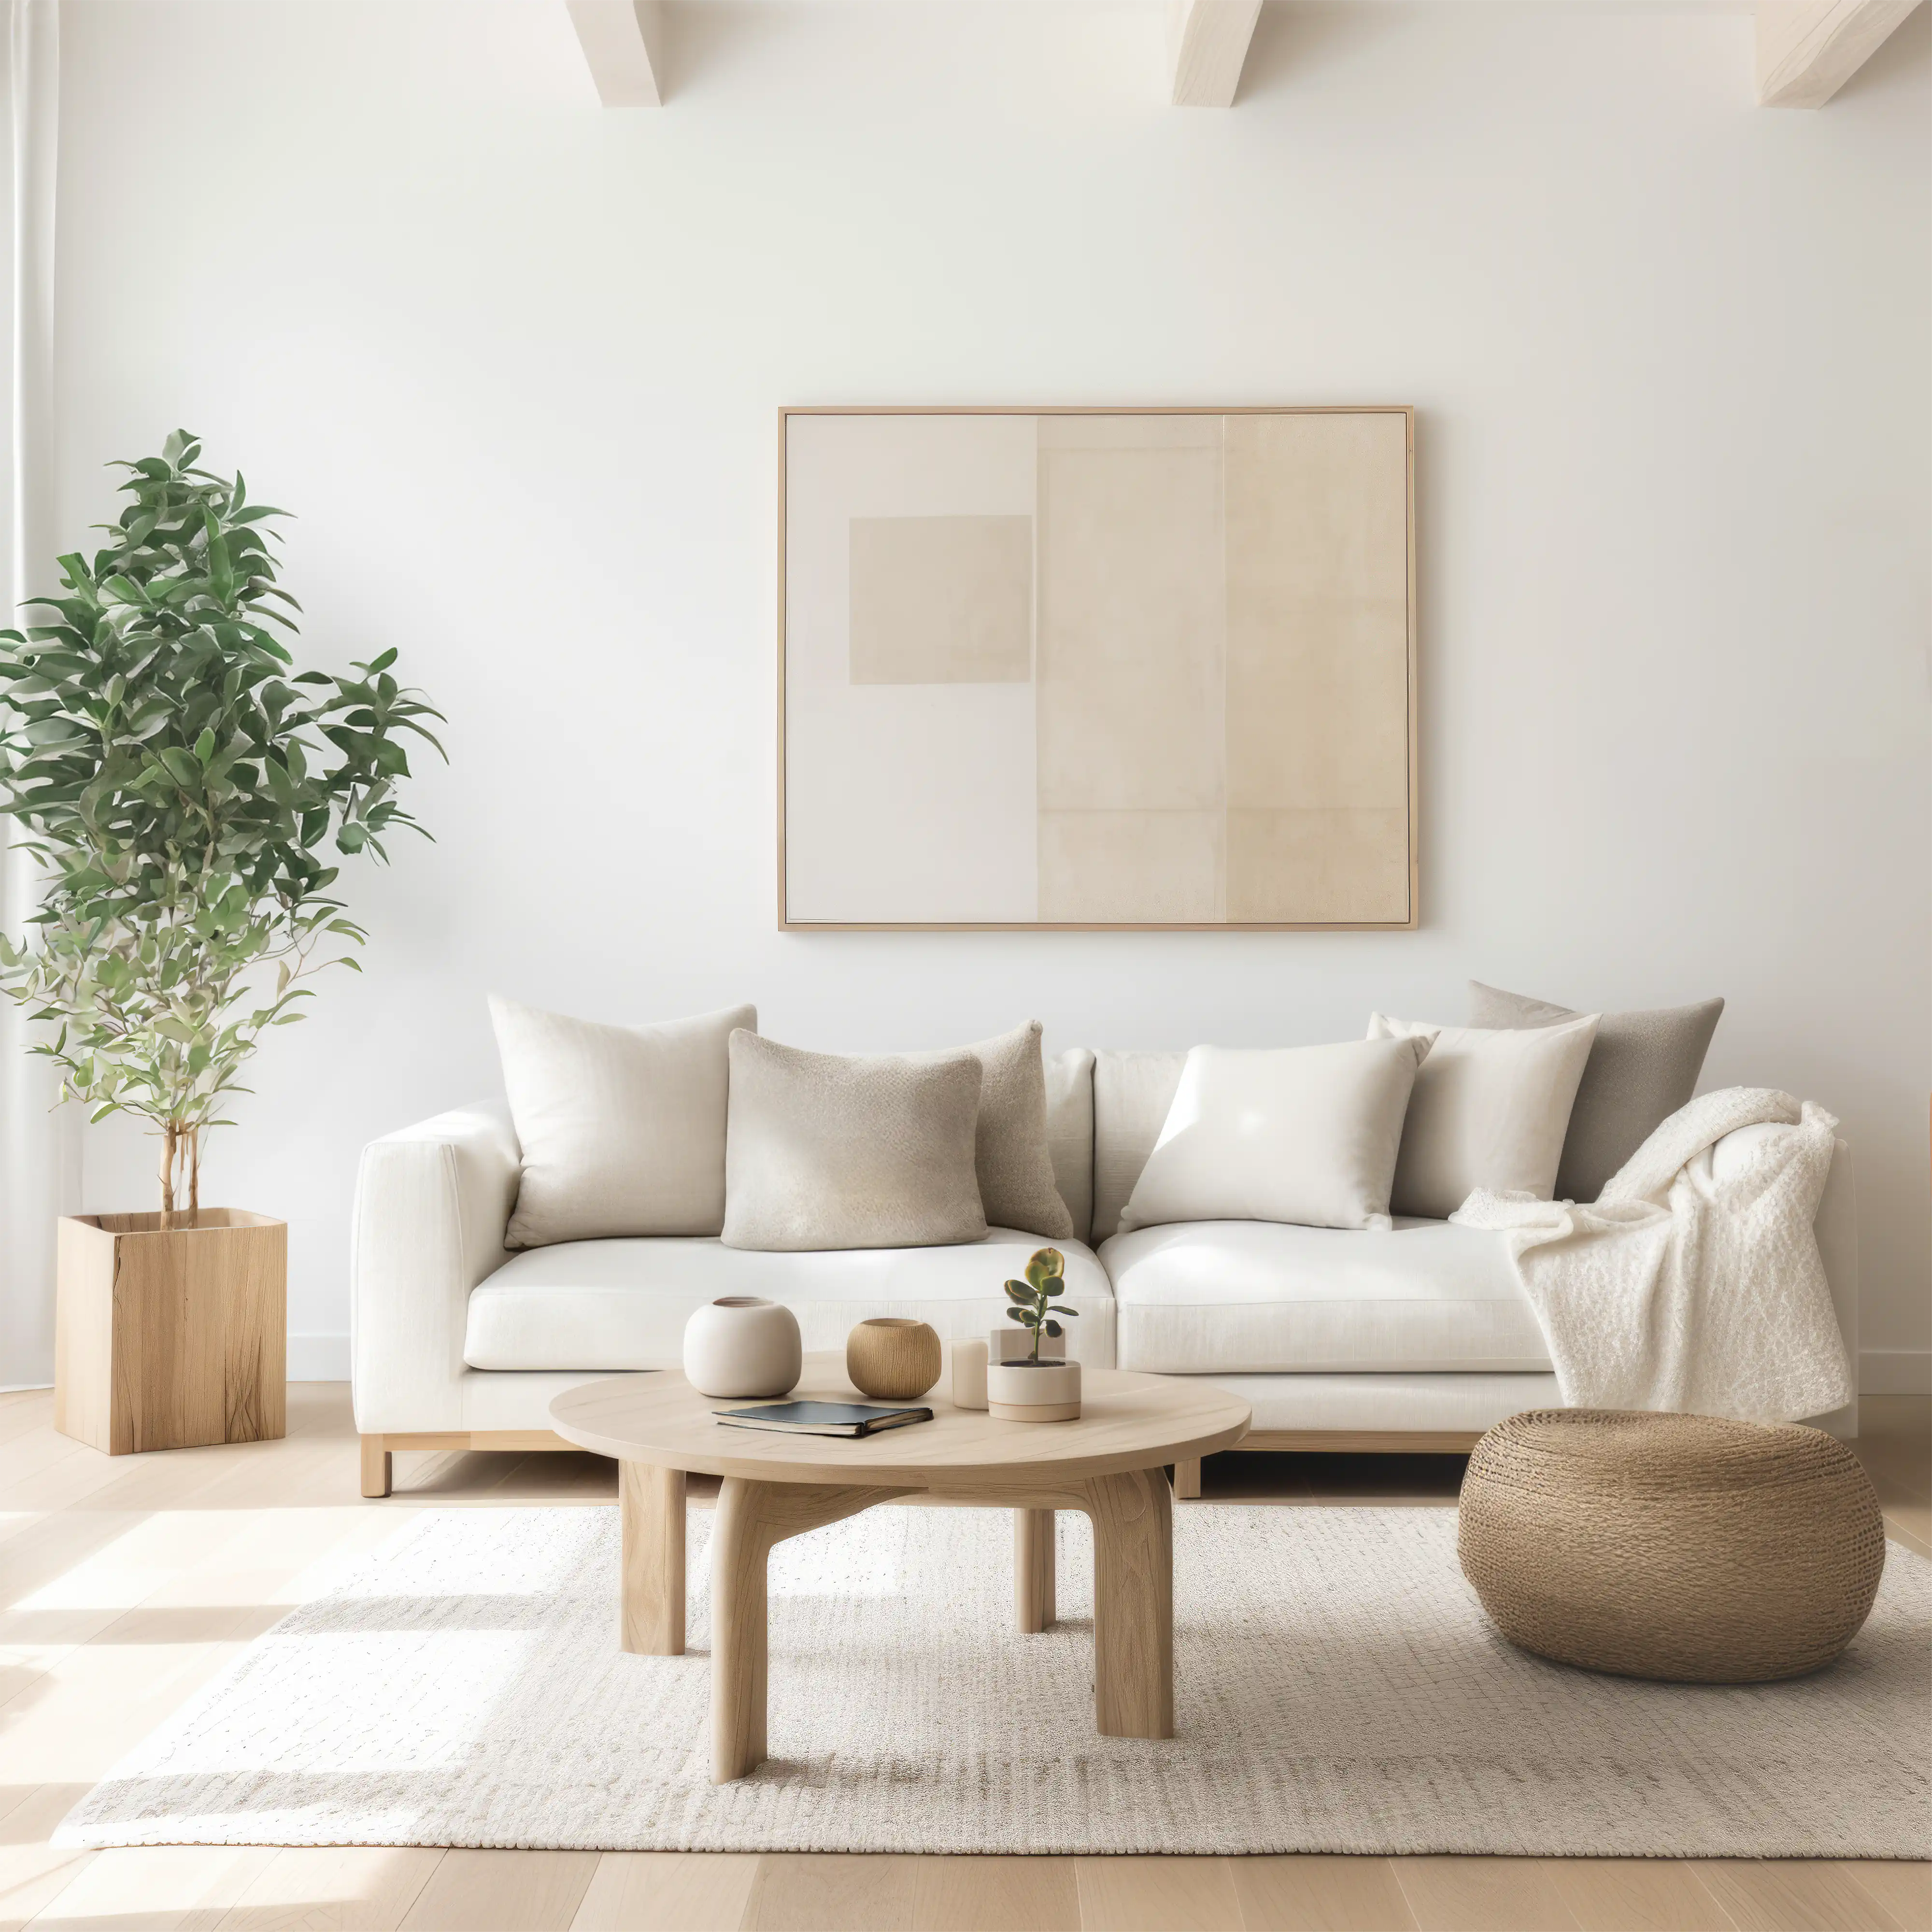 A modern living room with a white sofa, a wooden coffee table, a large potted plant and a framed abstract art piece, interior by Sarah Brown Design